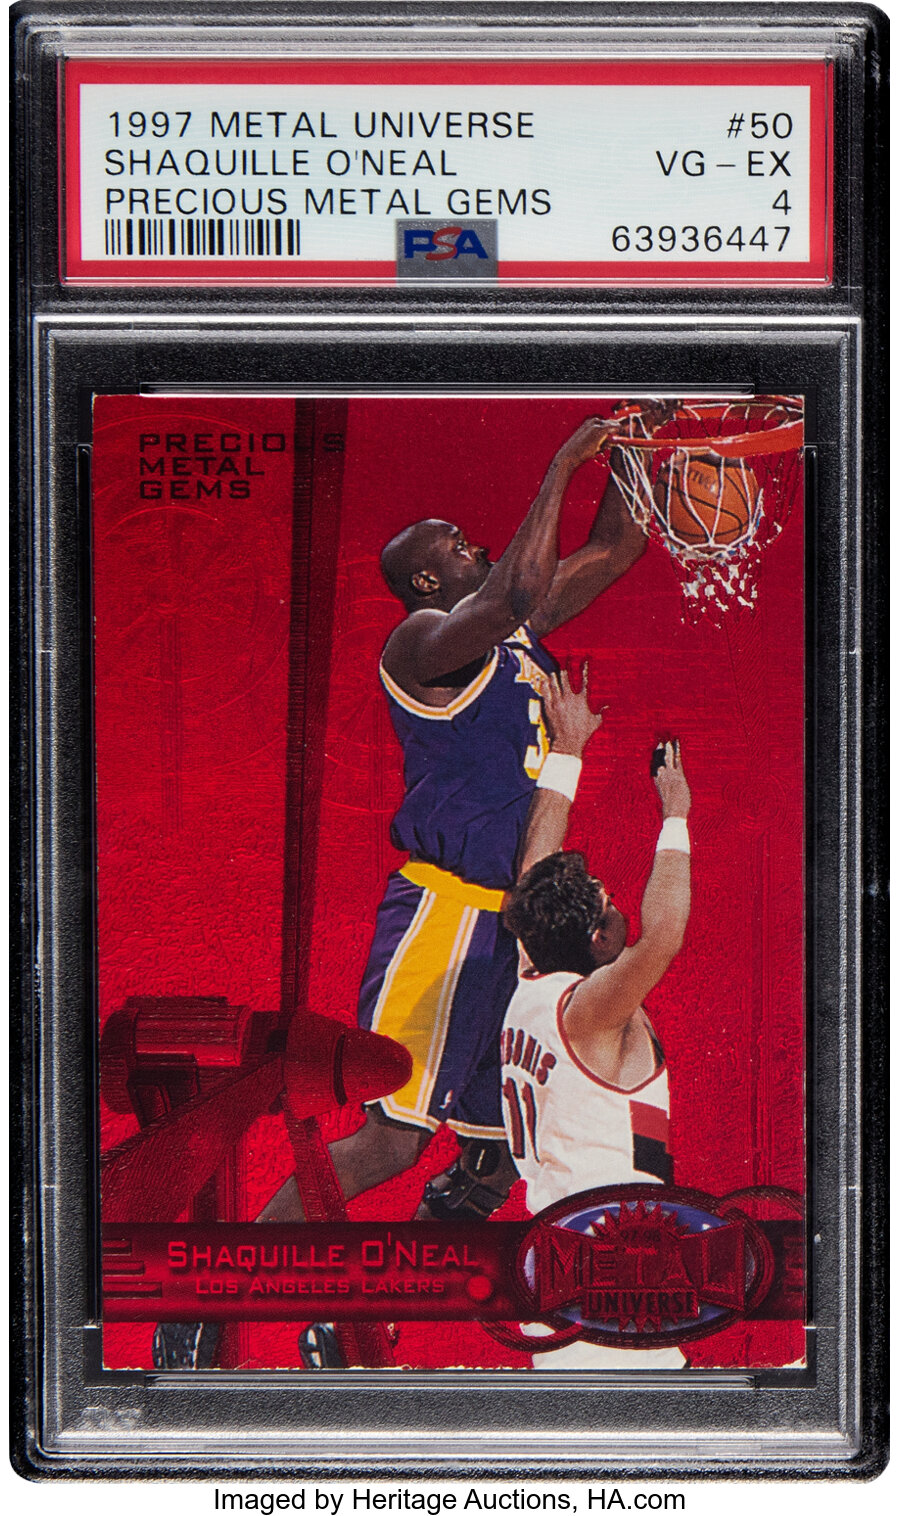 1997 Skybox Metal Universe Shaquille O'Neal (Precious Metal Gems-Ruby Red) #50 PSA VG-EX 4 - #'d 90/100